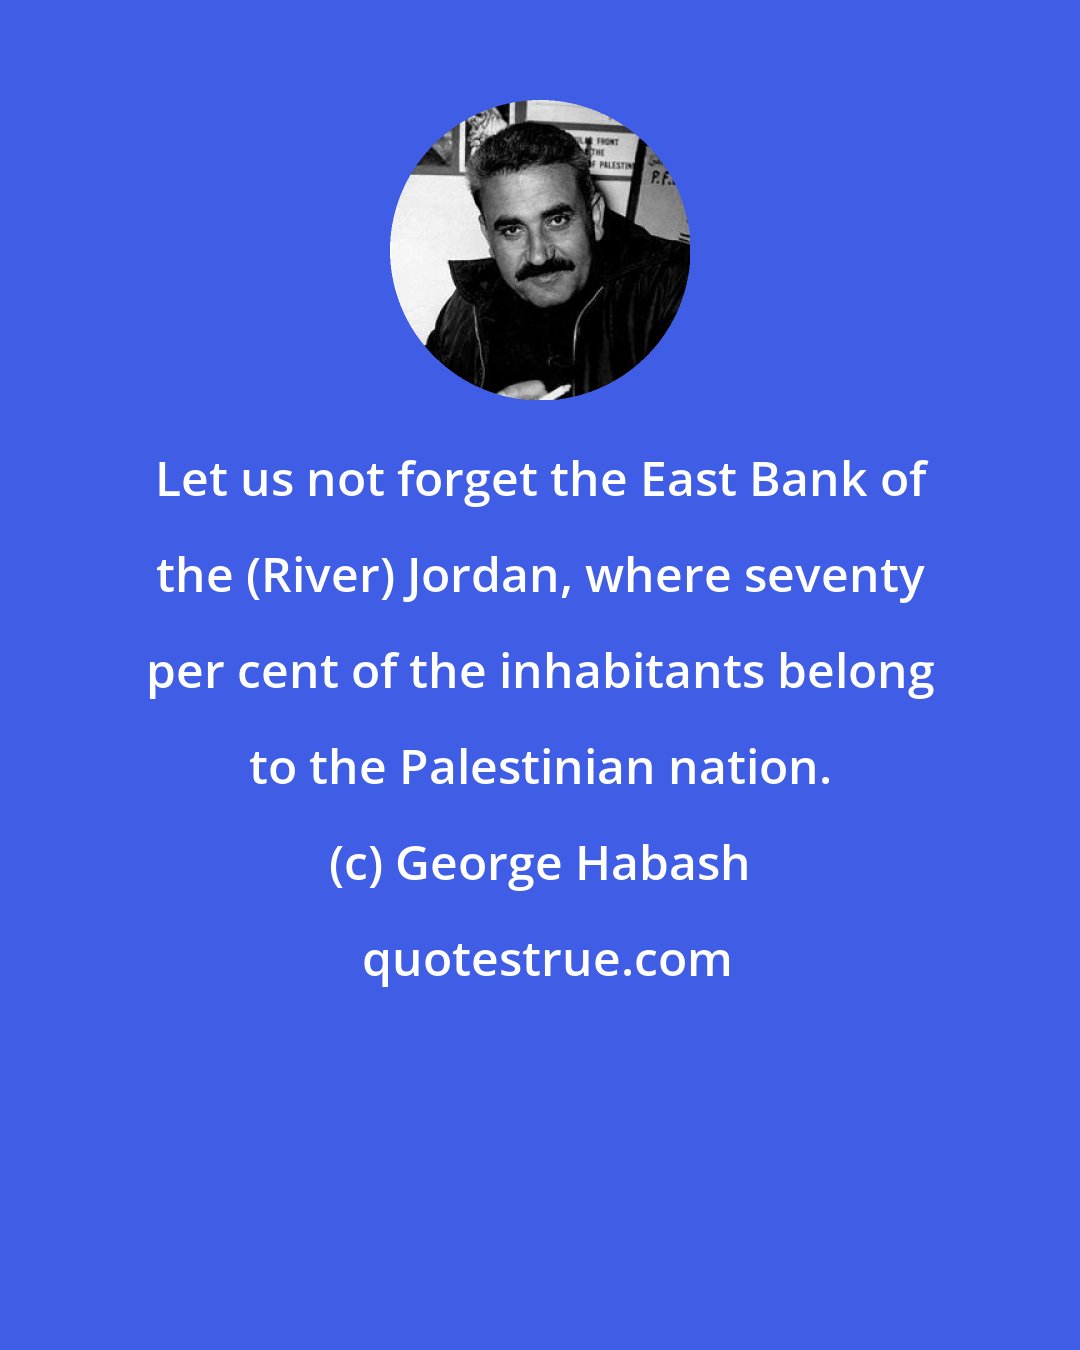 George Habash: Let us not forget the East Bank of the (River) Jordan, where seventy per cent of the inhabitants belong to the Palestinian nation.